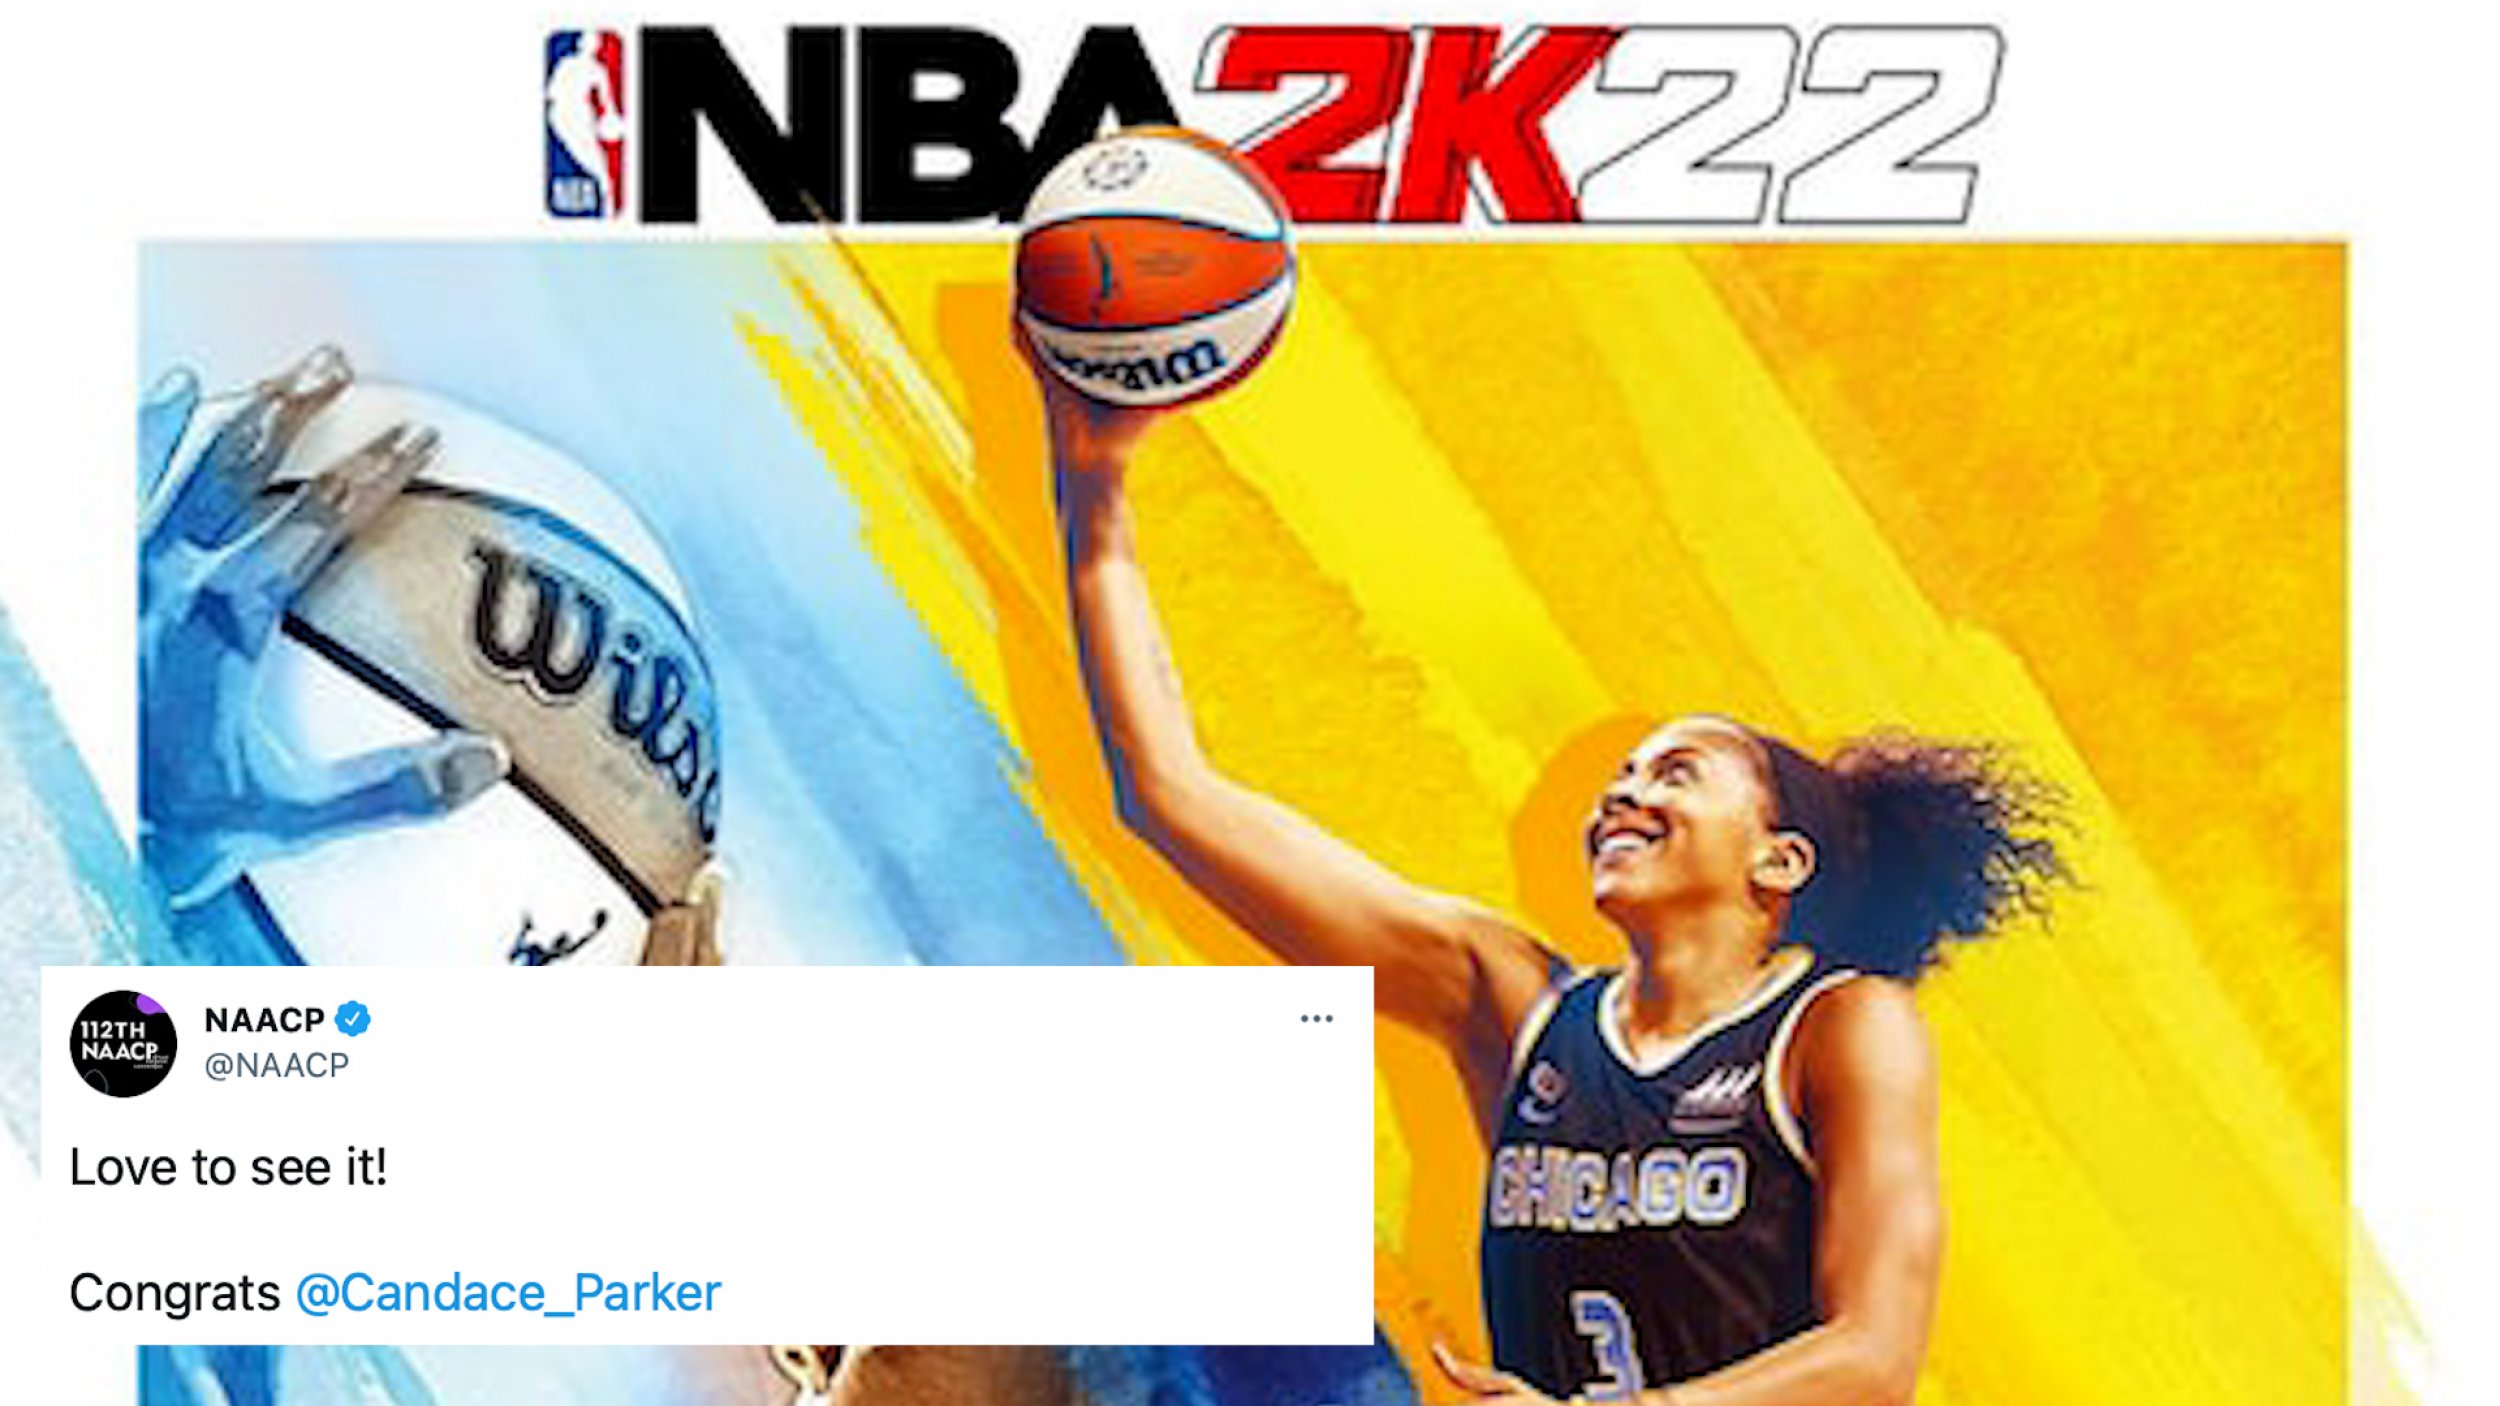 Twitter Reacts To Candace Parker, First Female Athlete To Be On NBA 2K Cover